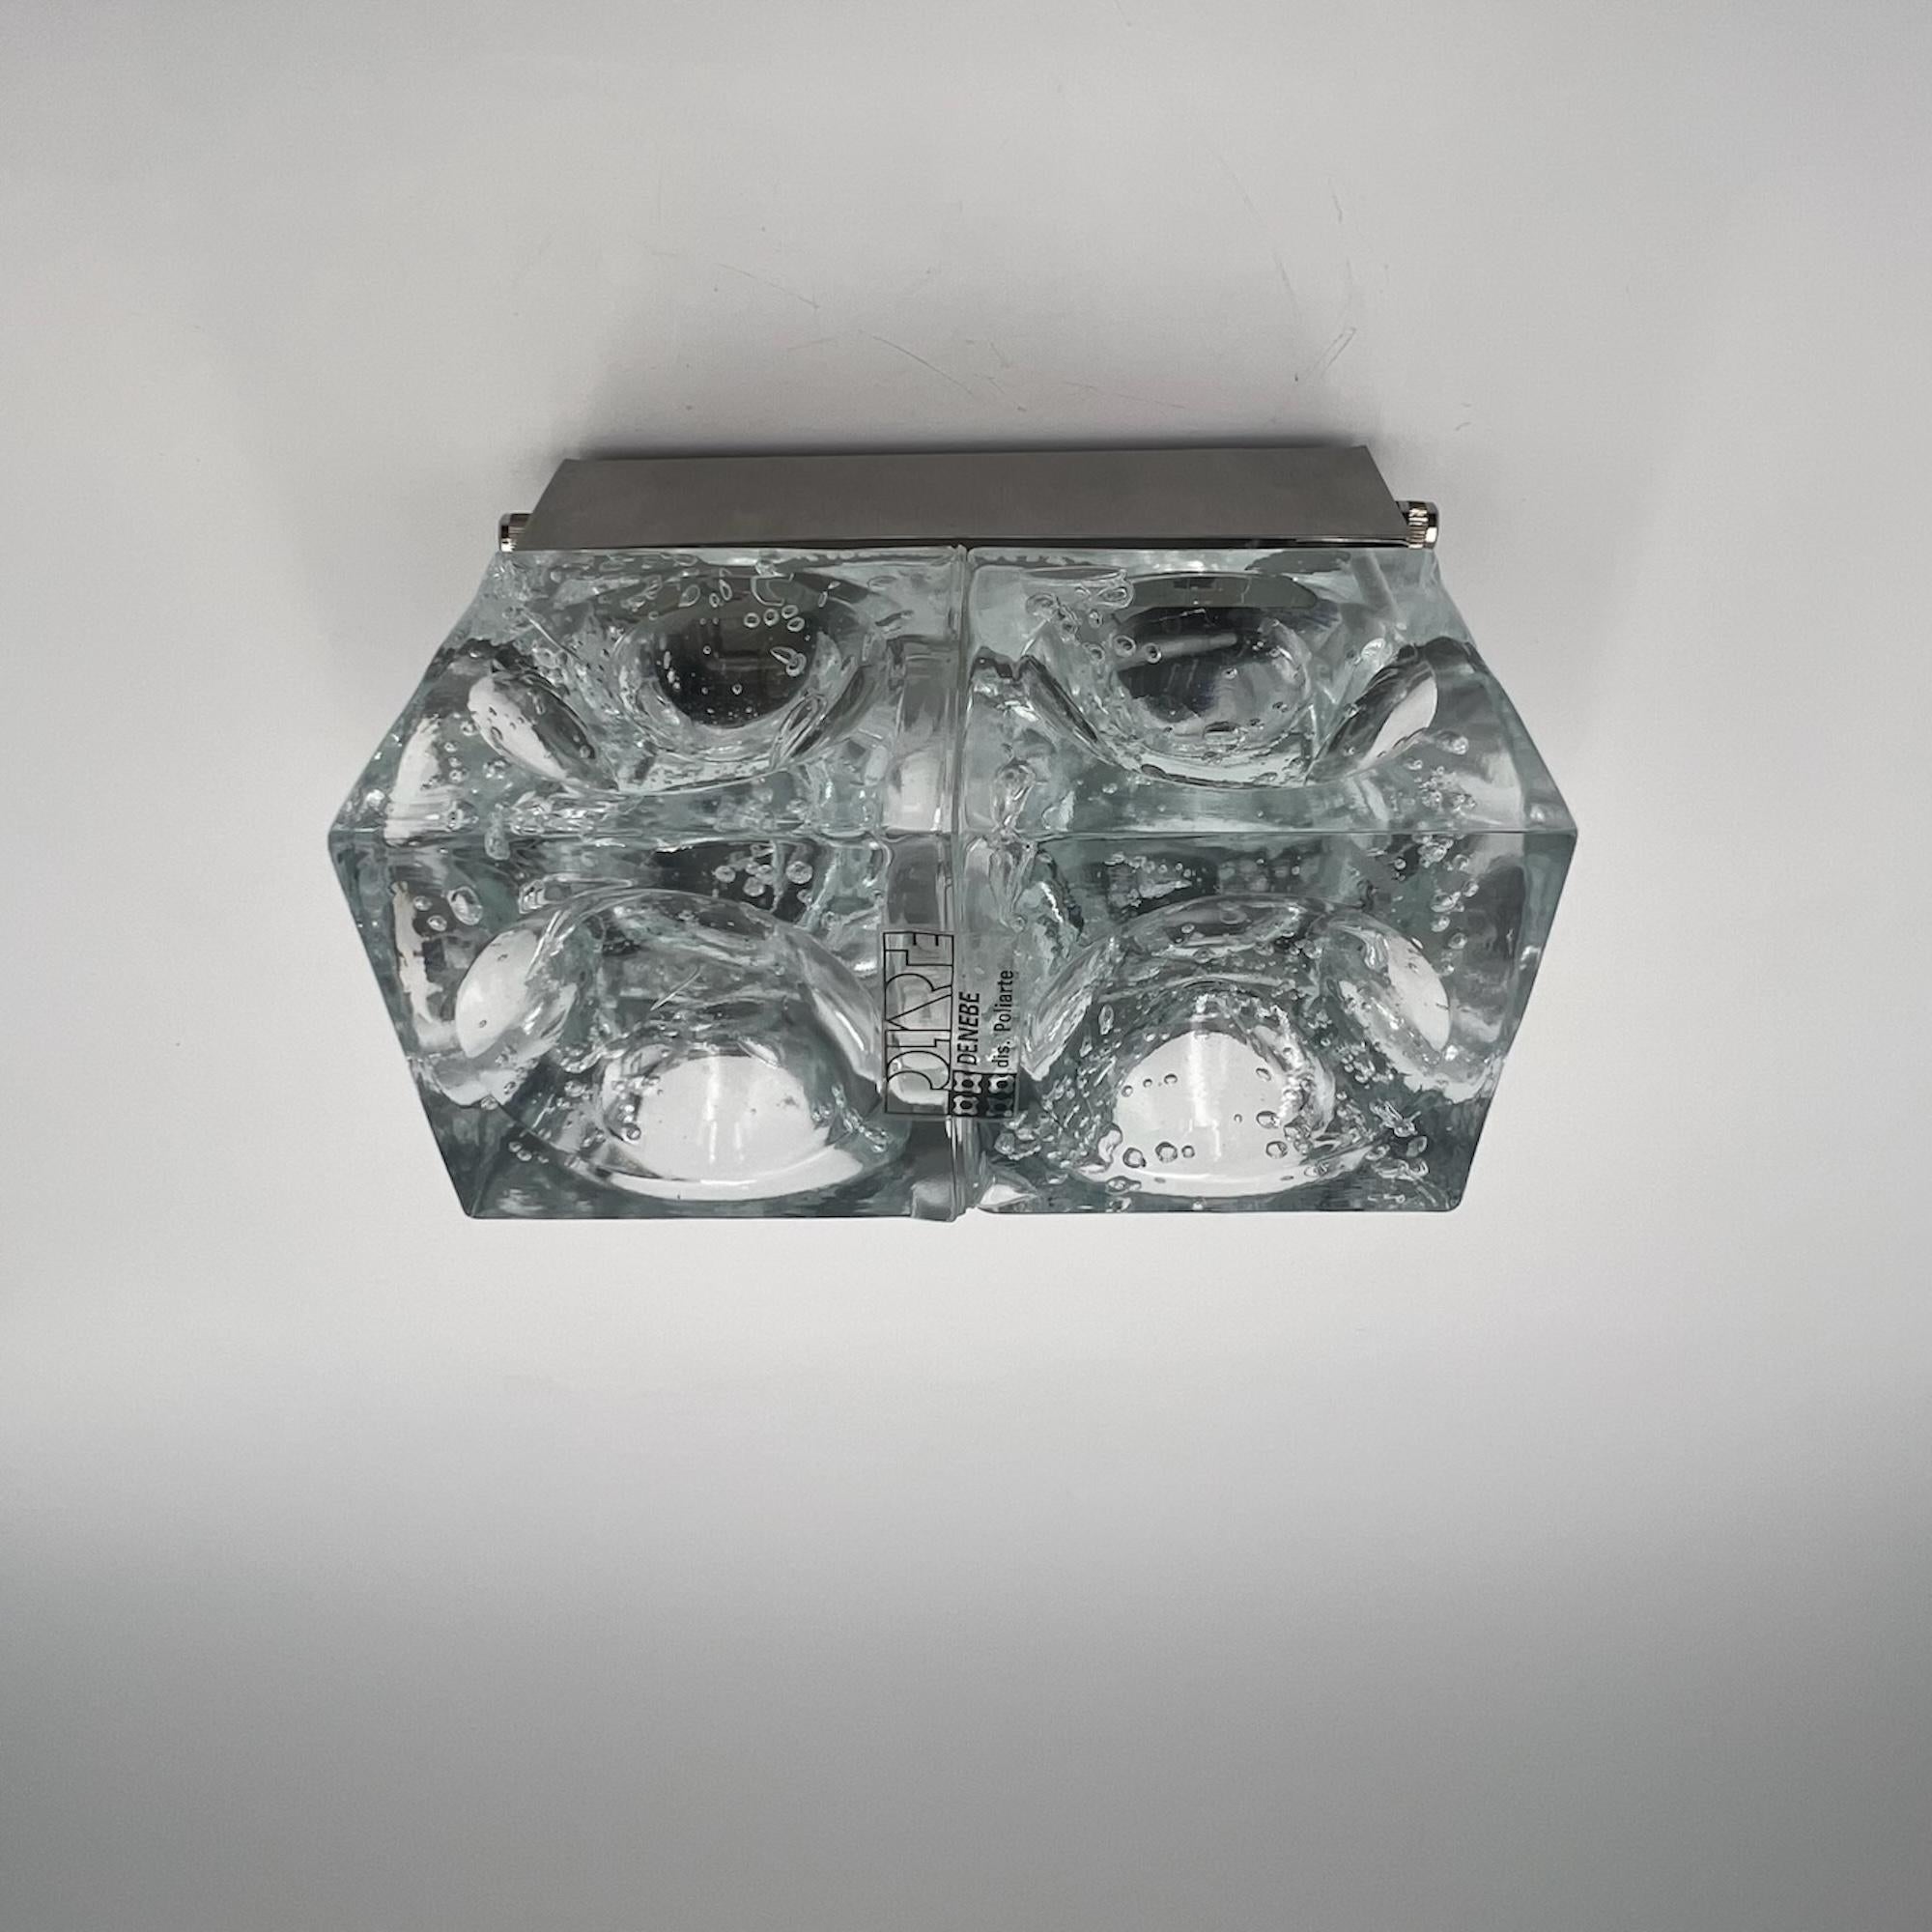 Late 20th Century Iconic Poliarte Lamp 'Denebe' - Handmade Glass Cubes Made in Italy For Sale